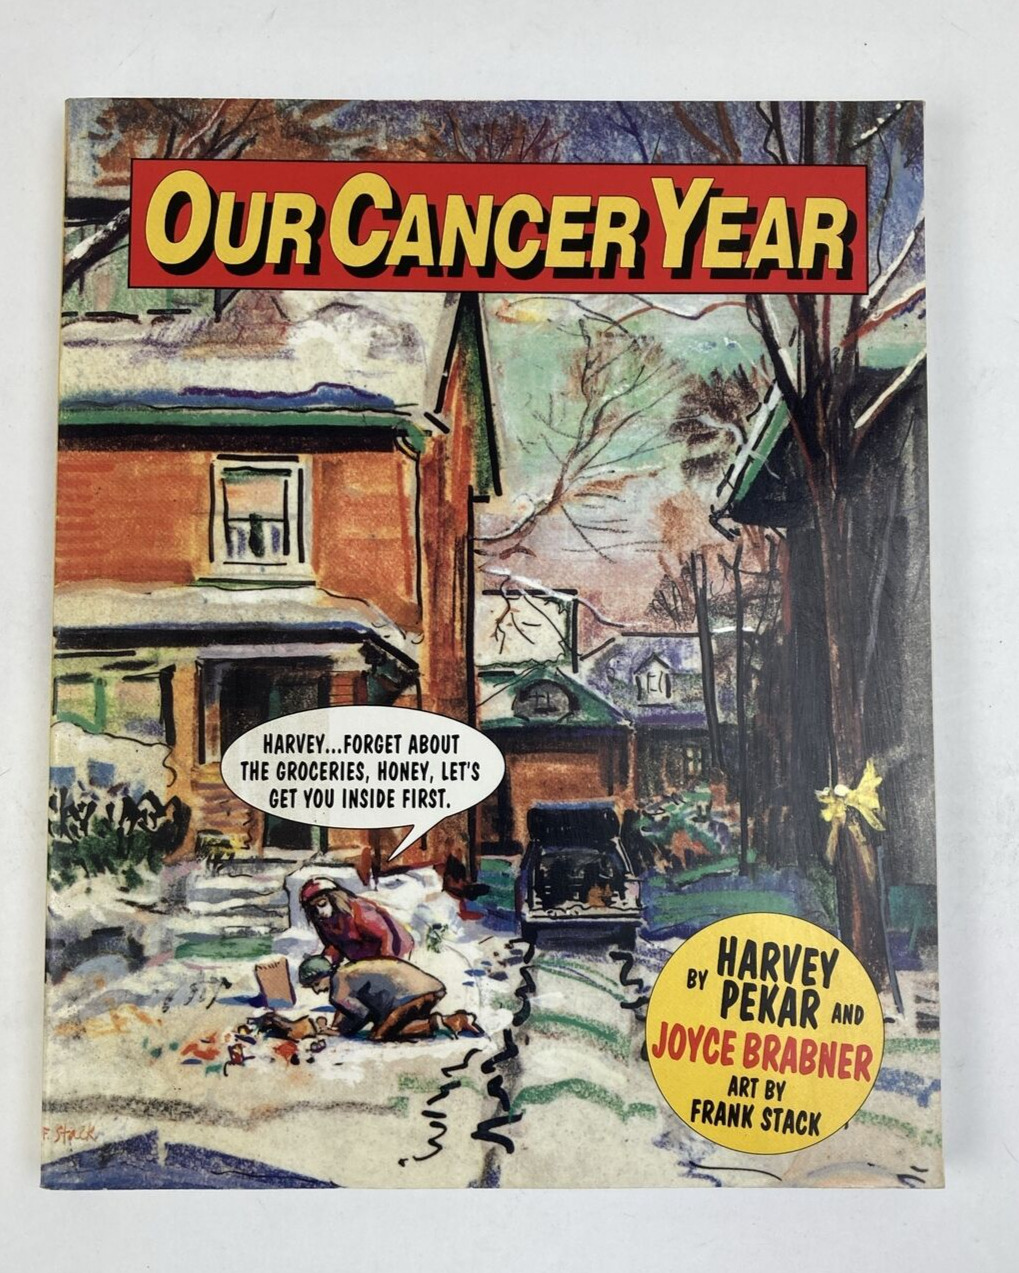 Our Cancer Year ,by Harvey Pekar & Joyce Brabner, Art by Frank Stack - SIGNED